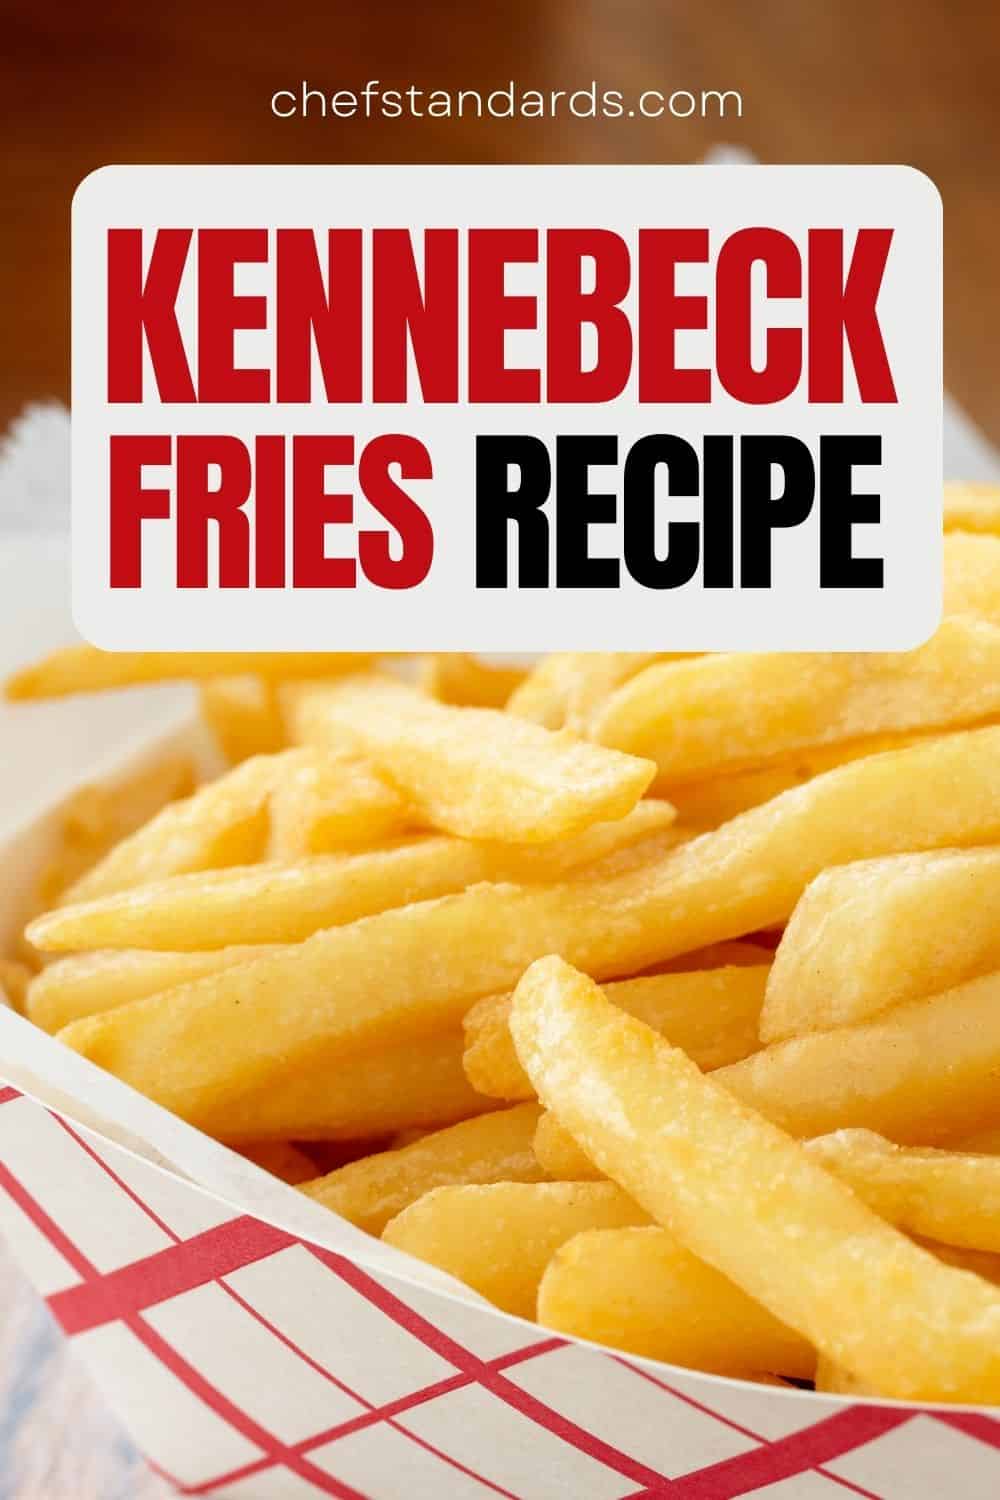 Kennebeck Fries - Recipe And All You Need To Know